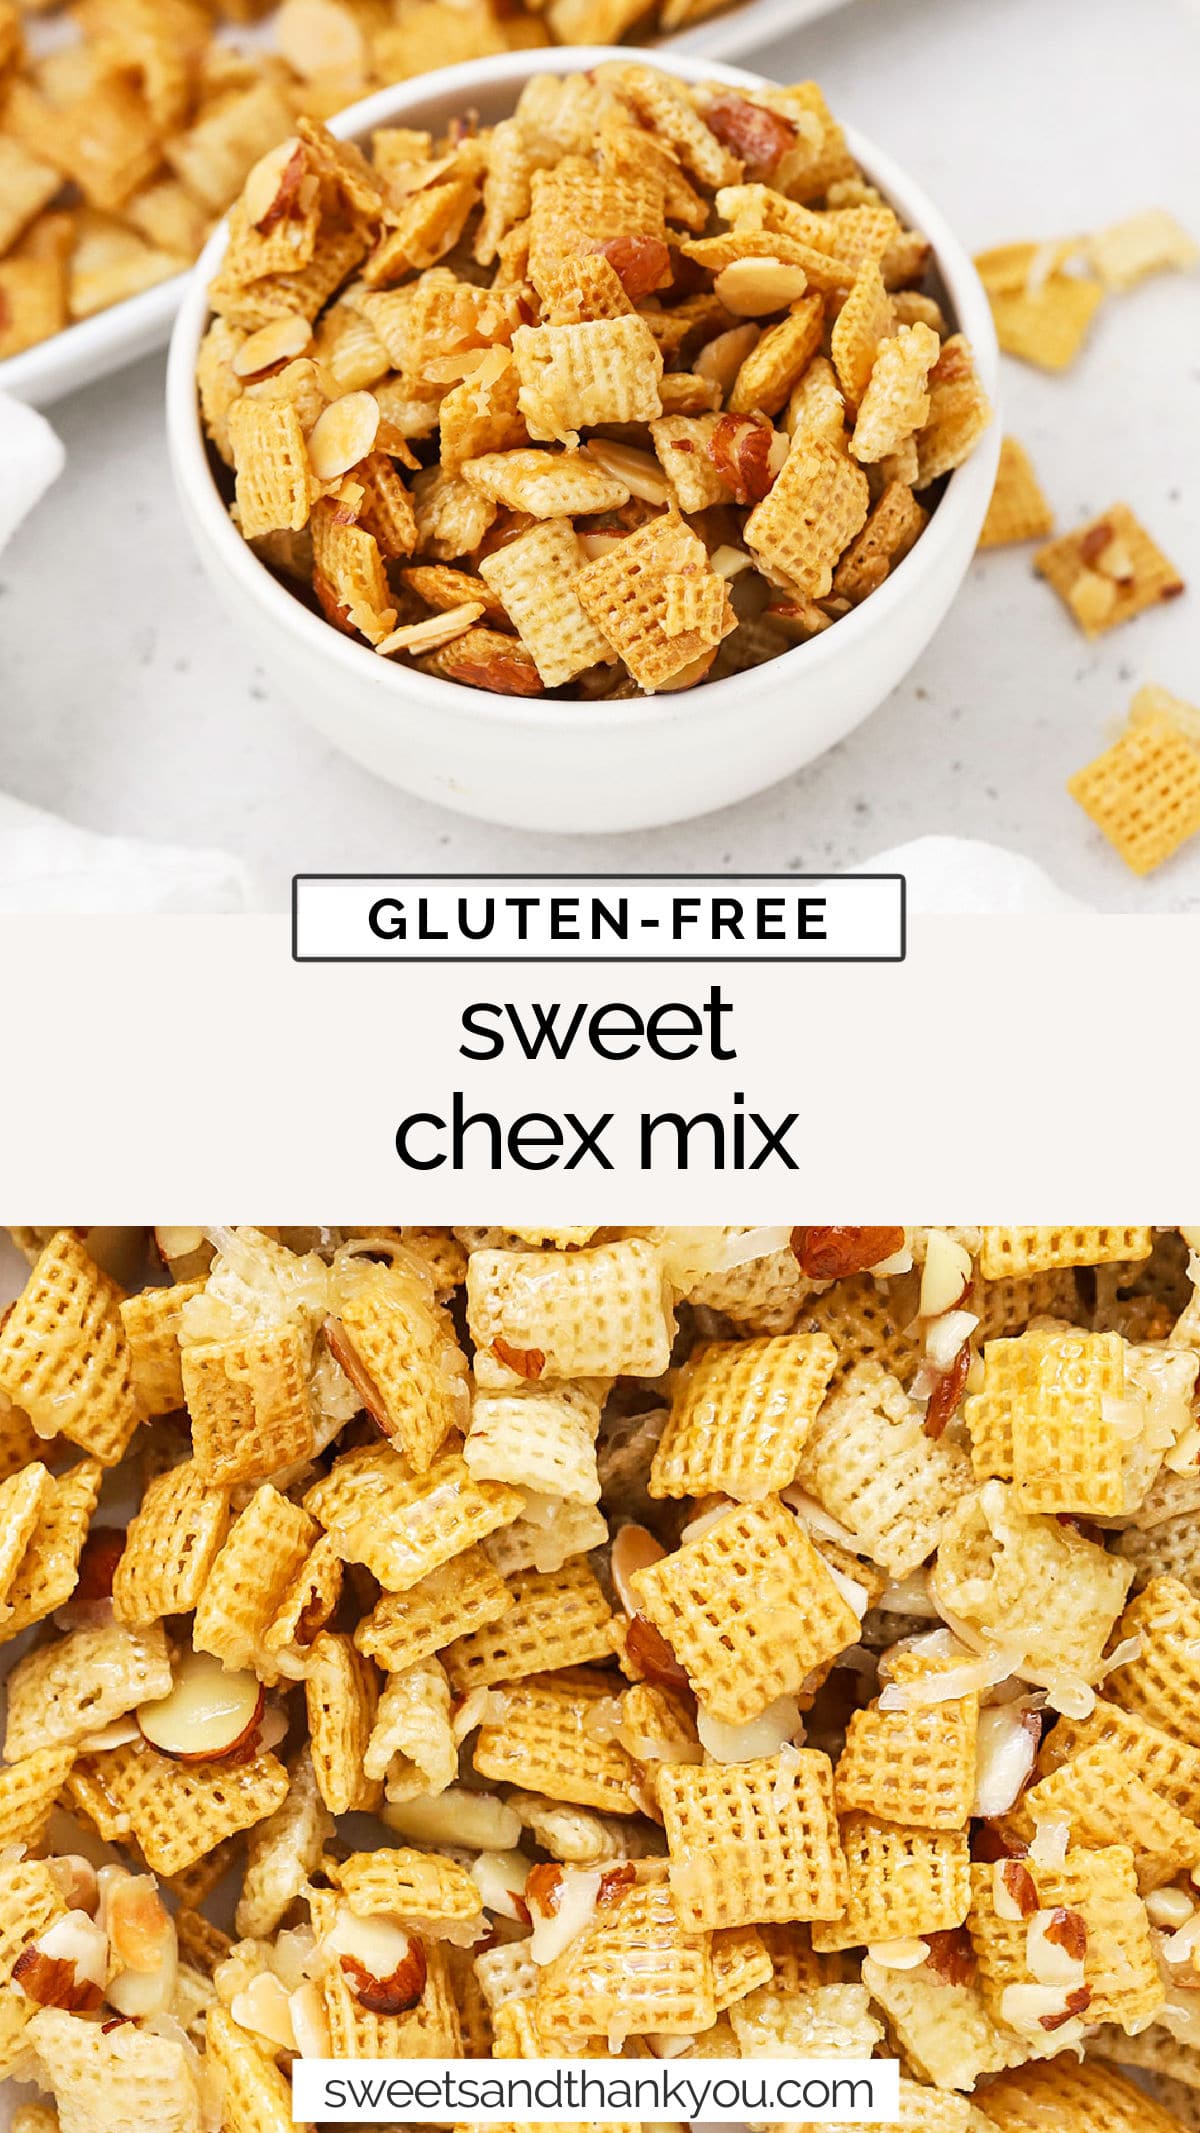 Let's make our Gluten-Free Sticky Chex Mix! This gooey coconut chex recipe has amazing flavor and is perfect for sharing with friends, neighbors, or party guests! / gluten-free coconut chex mix / gluten-free coconut almond chex mix / sticky holiday chex mix / is gooey chex mix gluten-free / gluten-free holiday treat / gluten-free sweet chex mix recipe